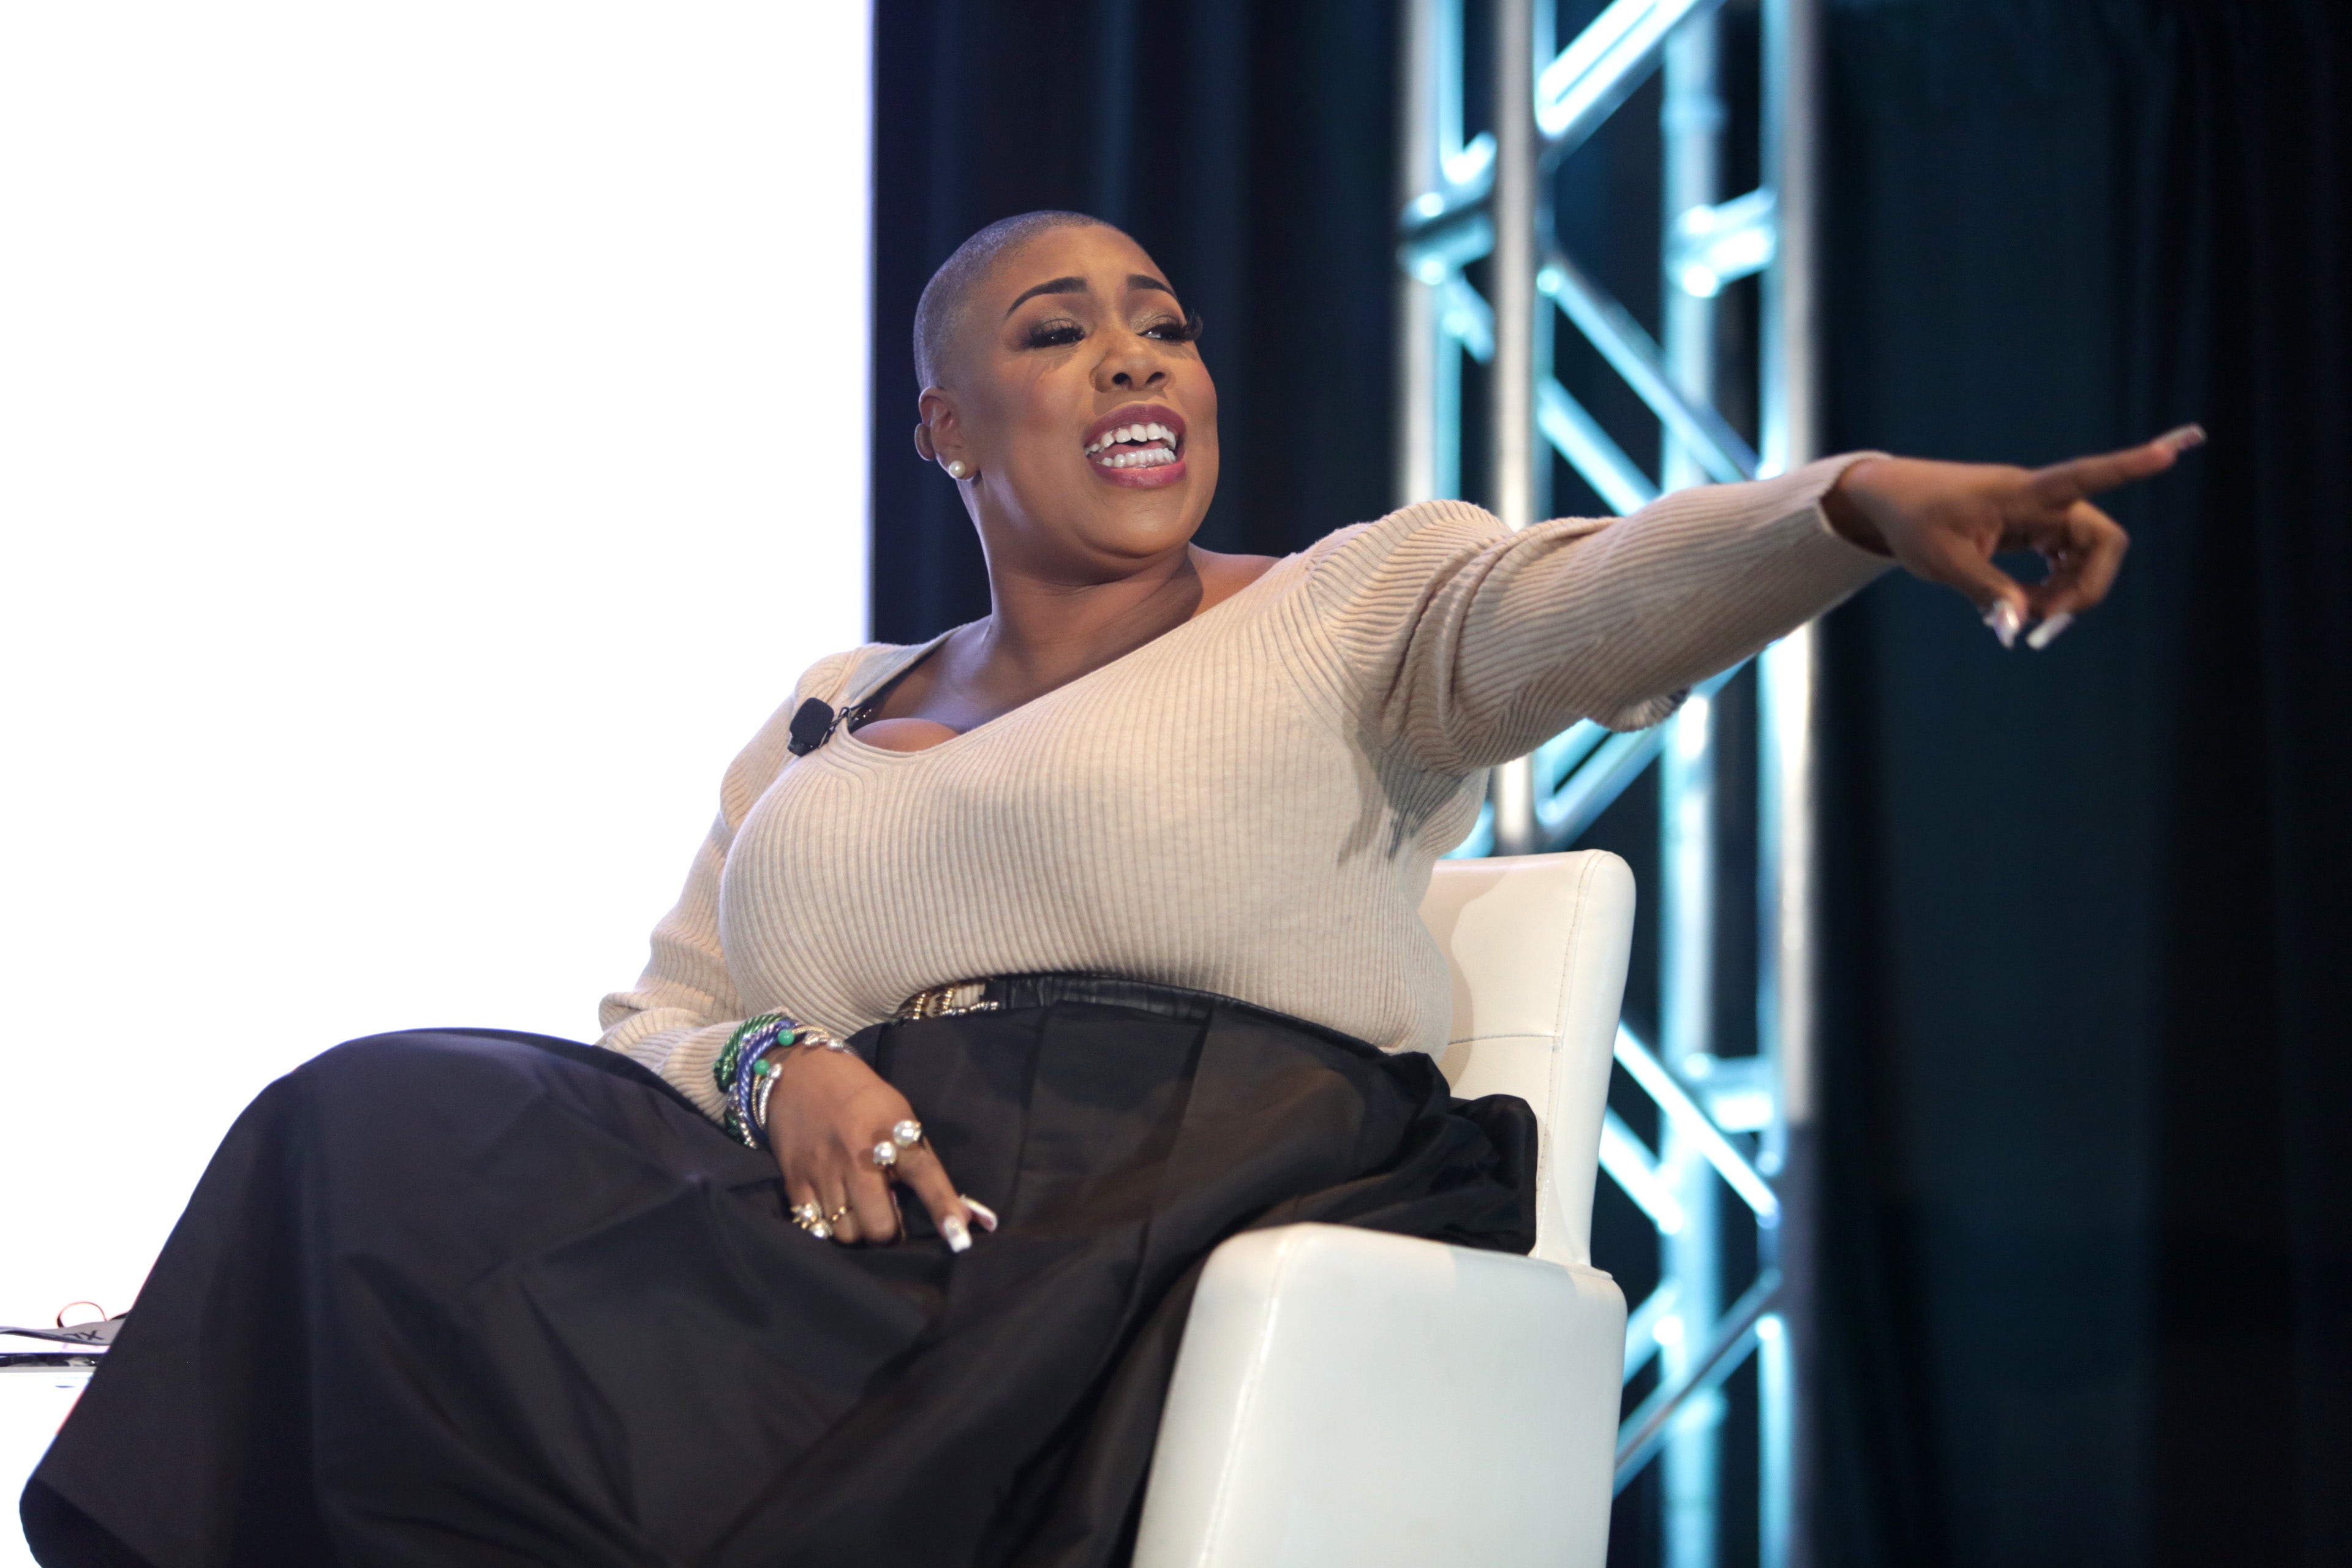 Symone Sanders slams Dems 'whispering' about Biden in 2024: If he shouldn't run, 'put your name on that quote'